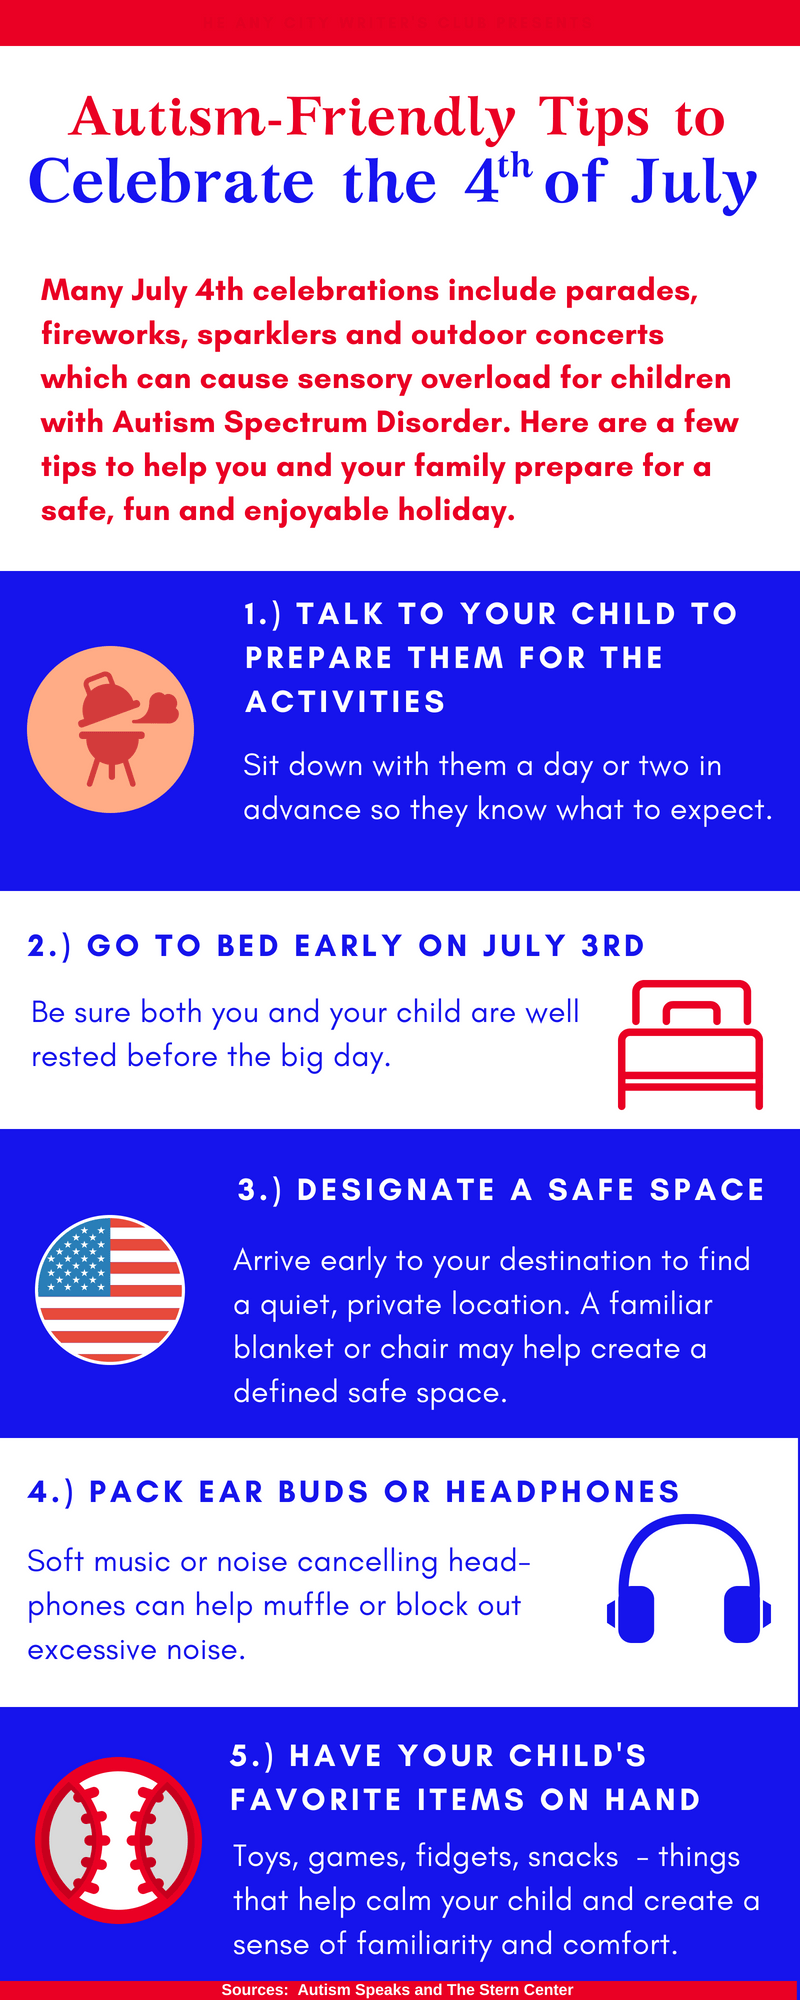 Autism-Friendly Tips to Celebrate the 4th of July infographic